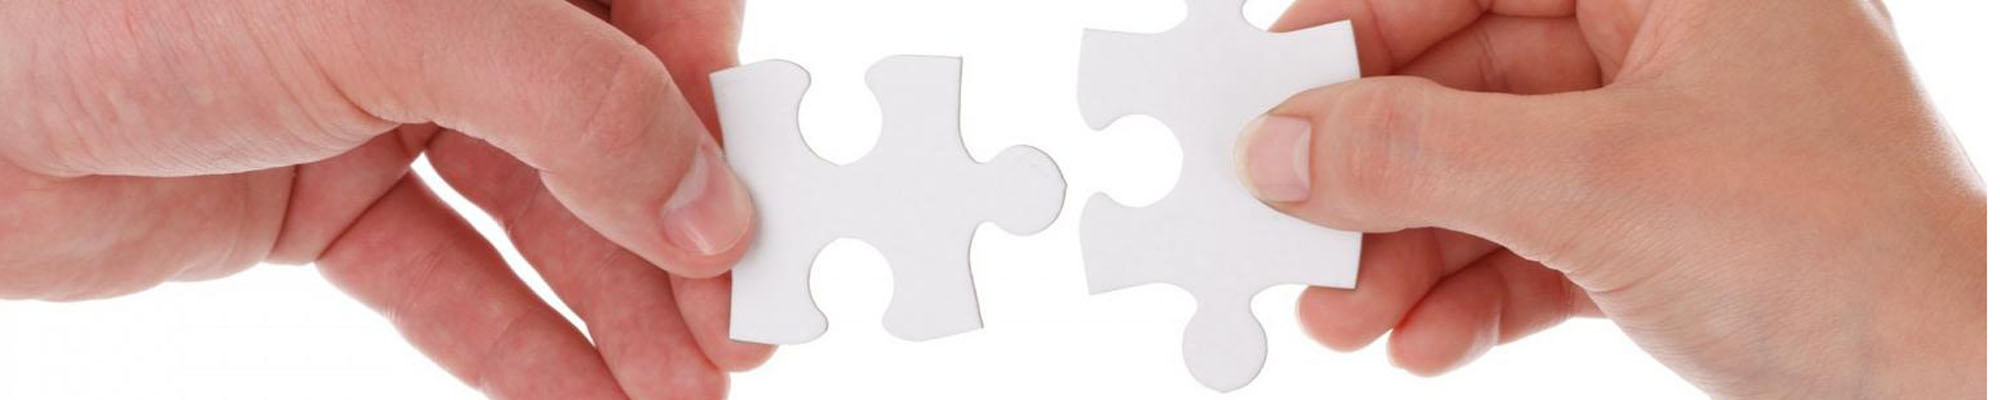 Two hands fitting matching puzzle pieces together